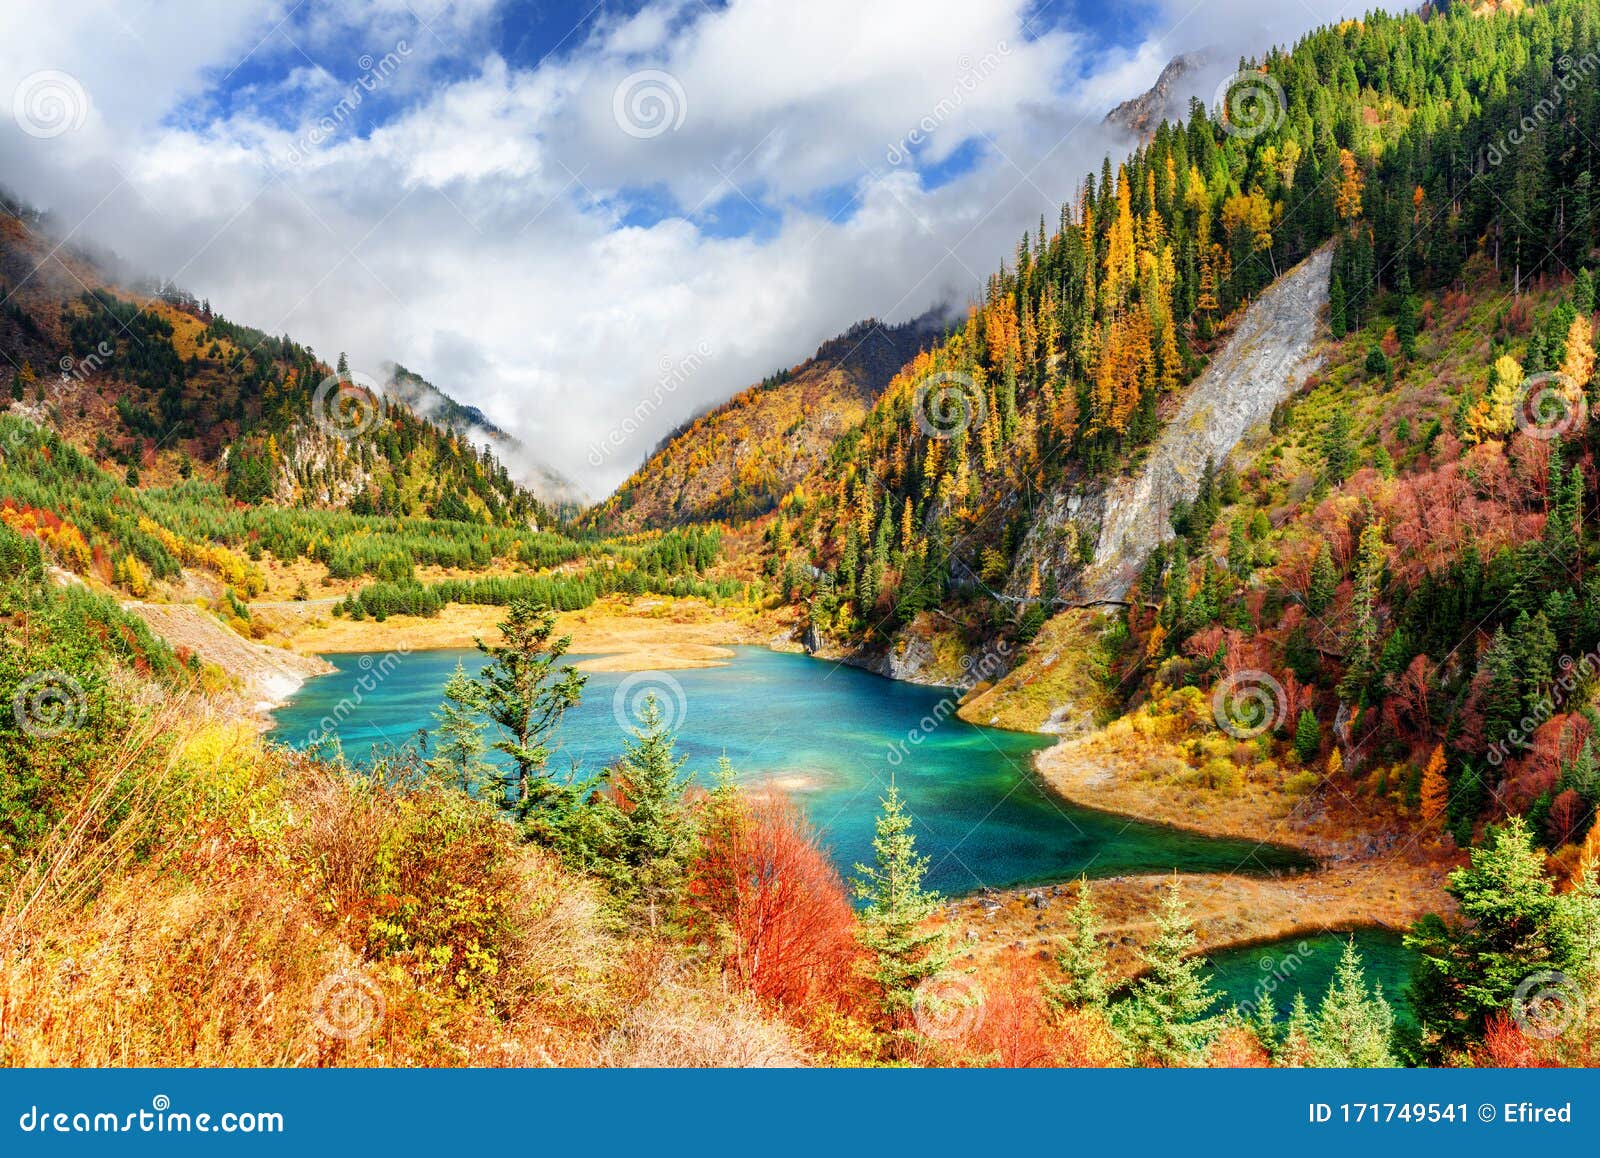 Amazing View Of The Upper Seasonal Lake With Azure Water Stock Image